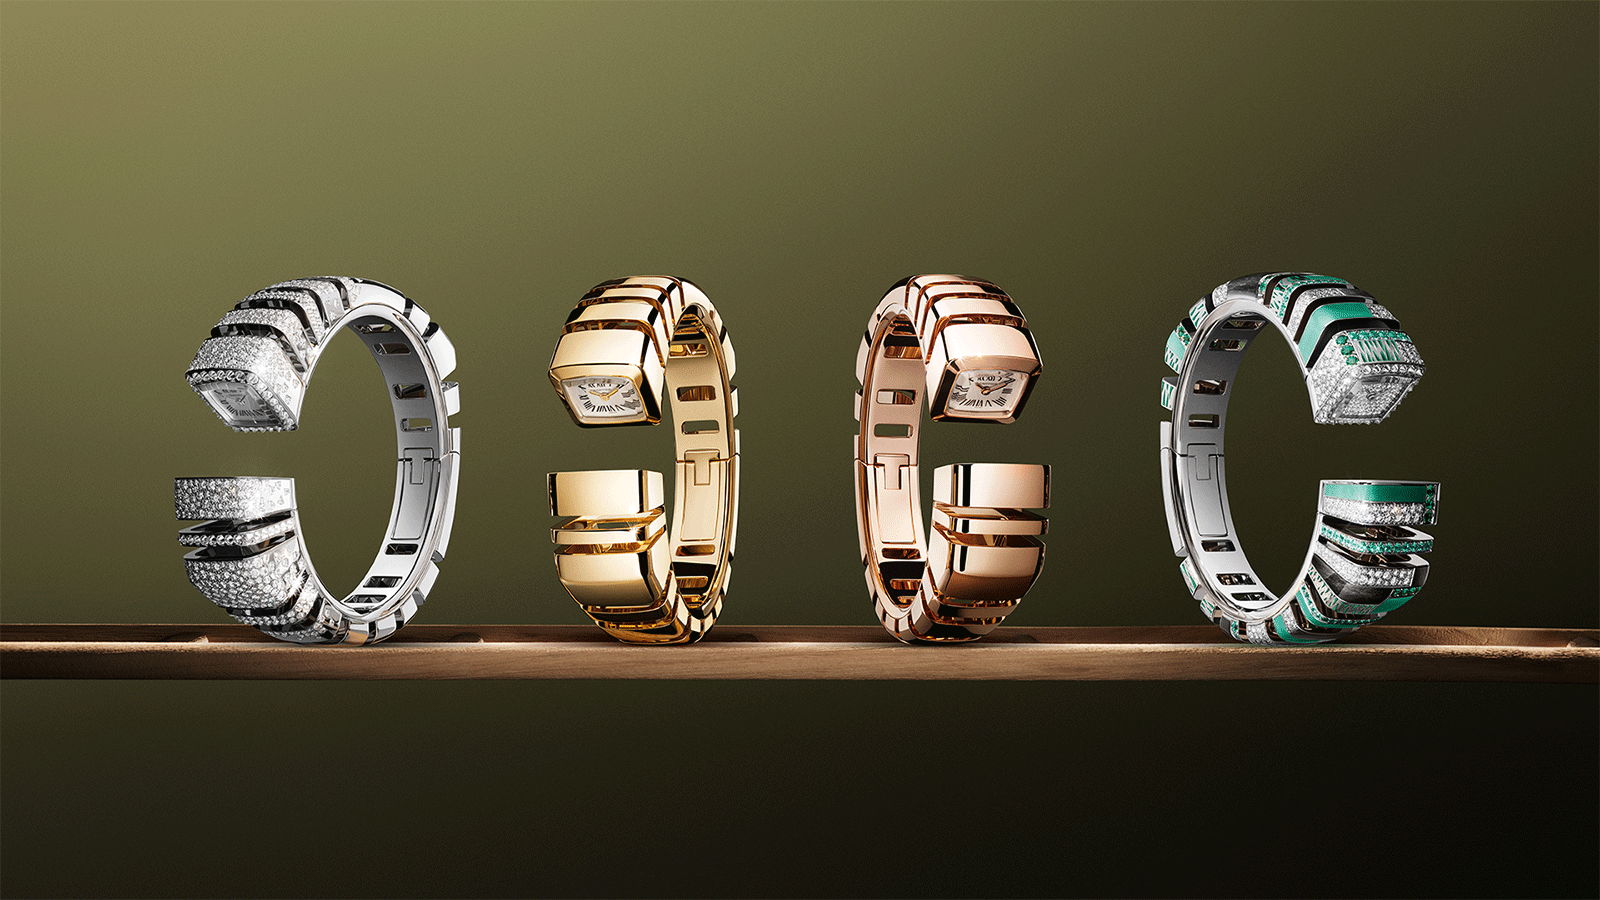 Offered in solid yellow gold, solid rose gold, and three variations with gemstones set in white gold, this quartz-driven timepiece is discreetly housed within the cuff's aperture.